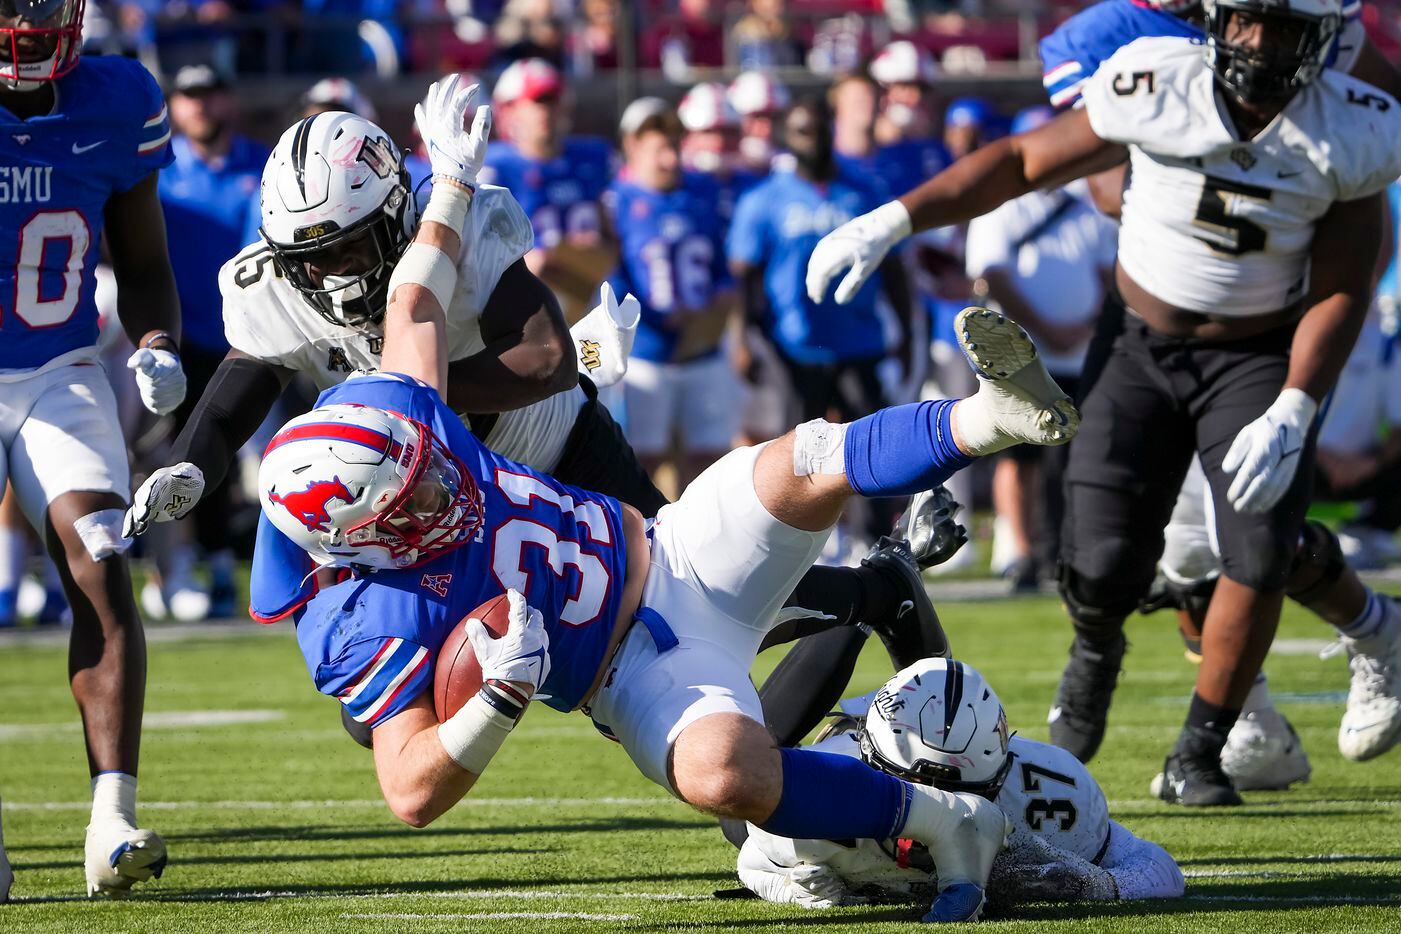 SMU running back Tyler Lavine (31) is knocked off his feet by UCF defensive back Quadric...